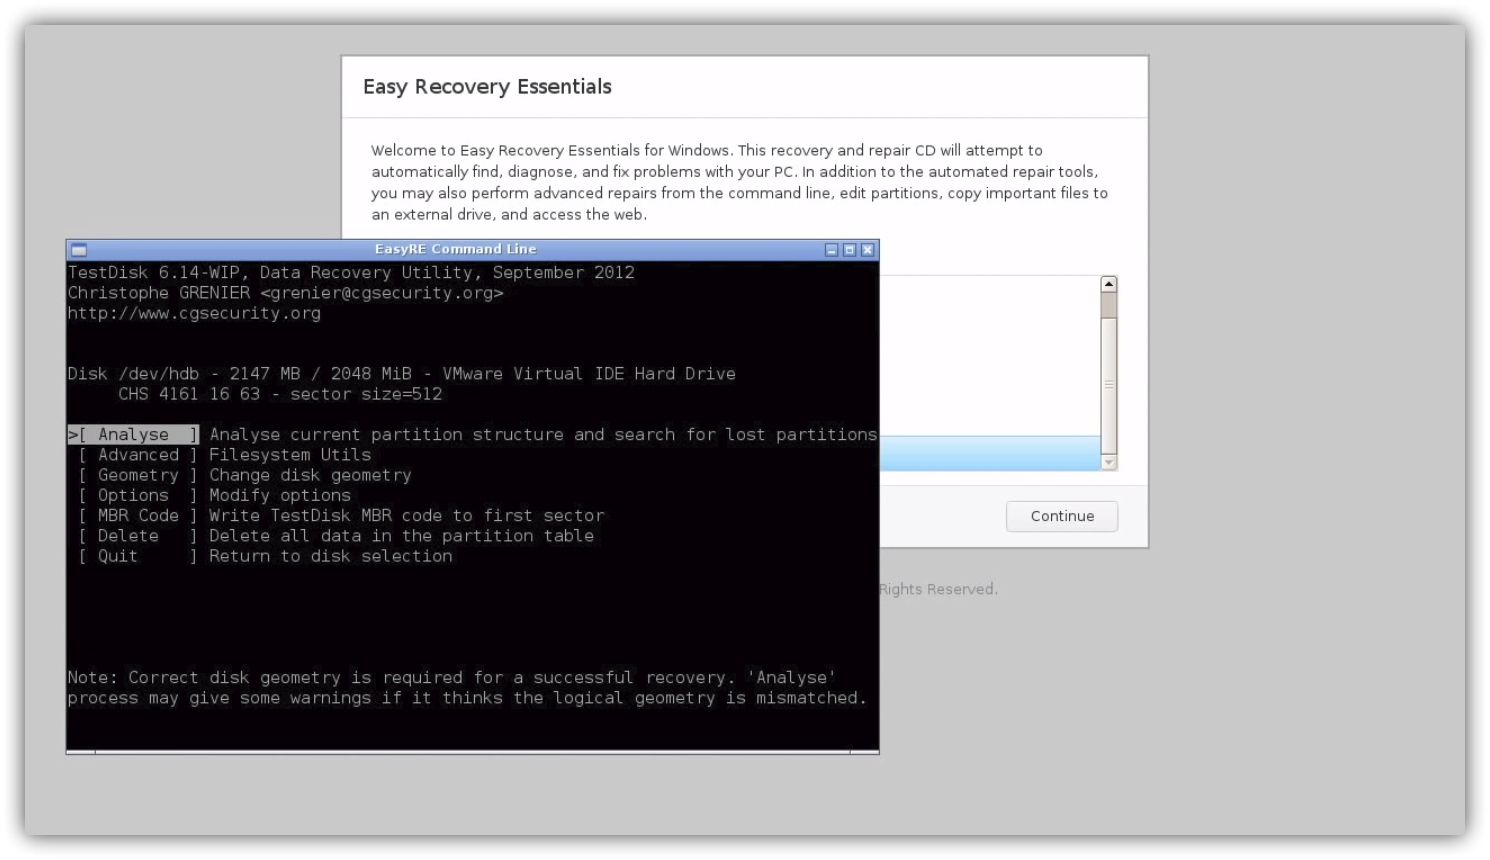 Easy Recovery Essentials For Windows